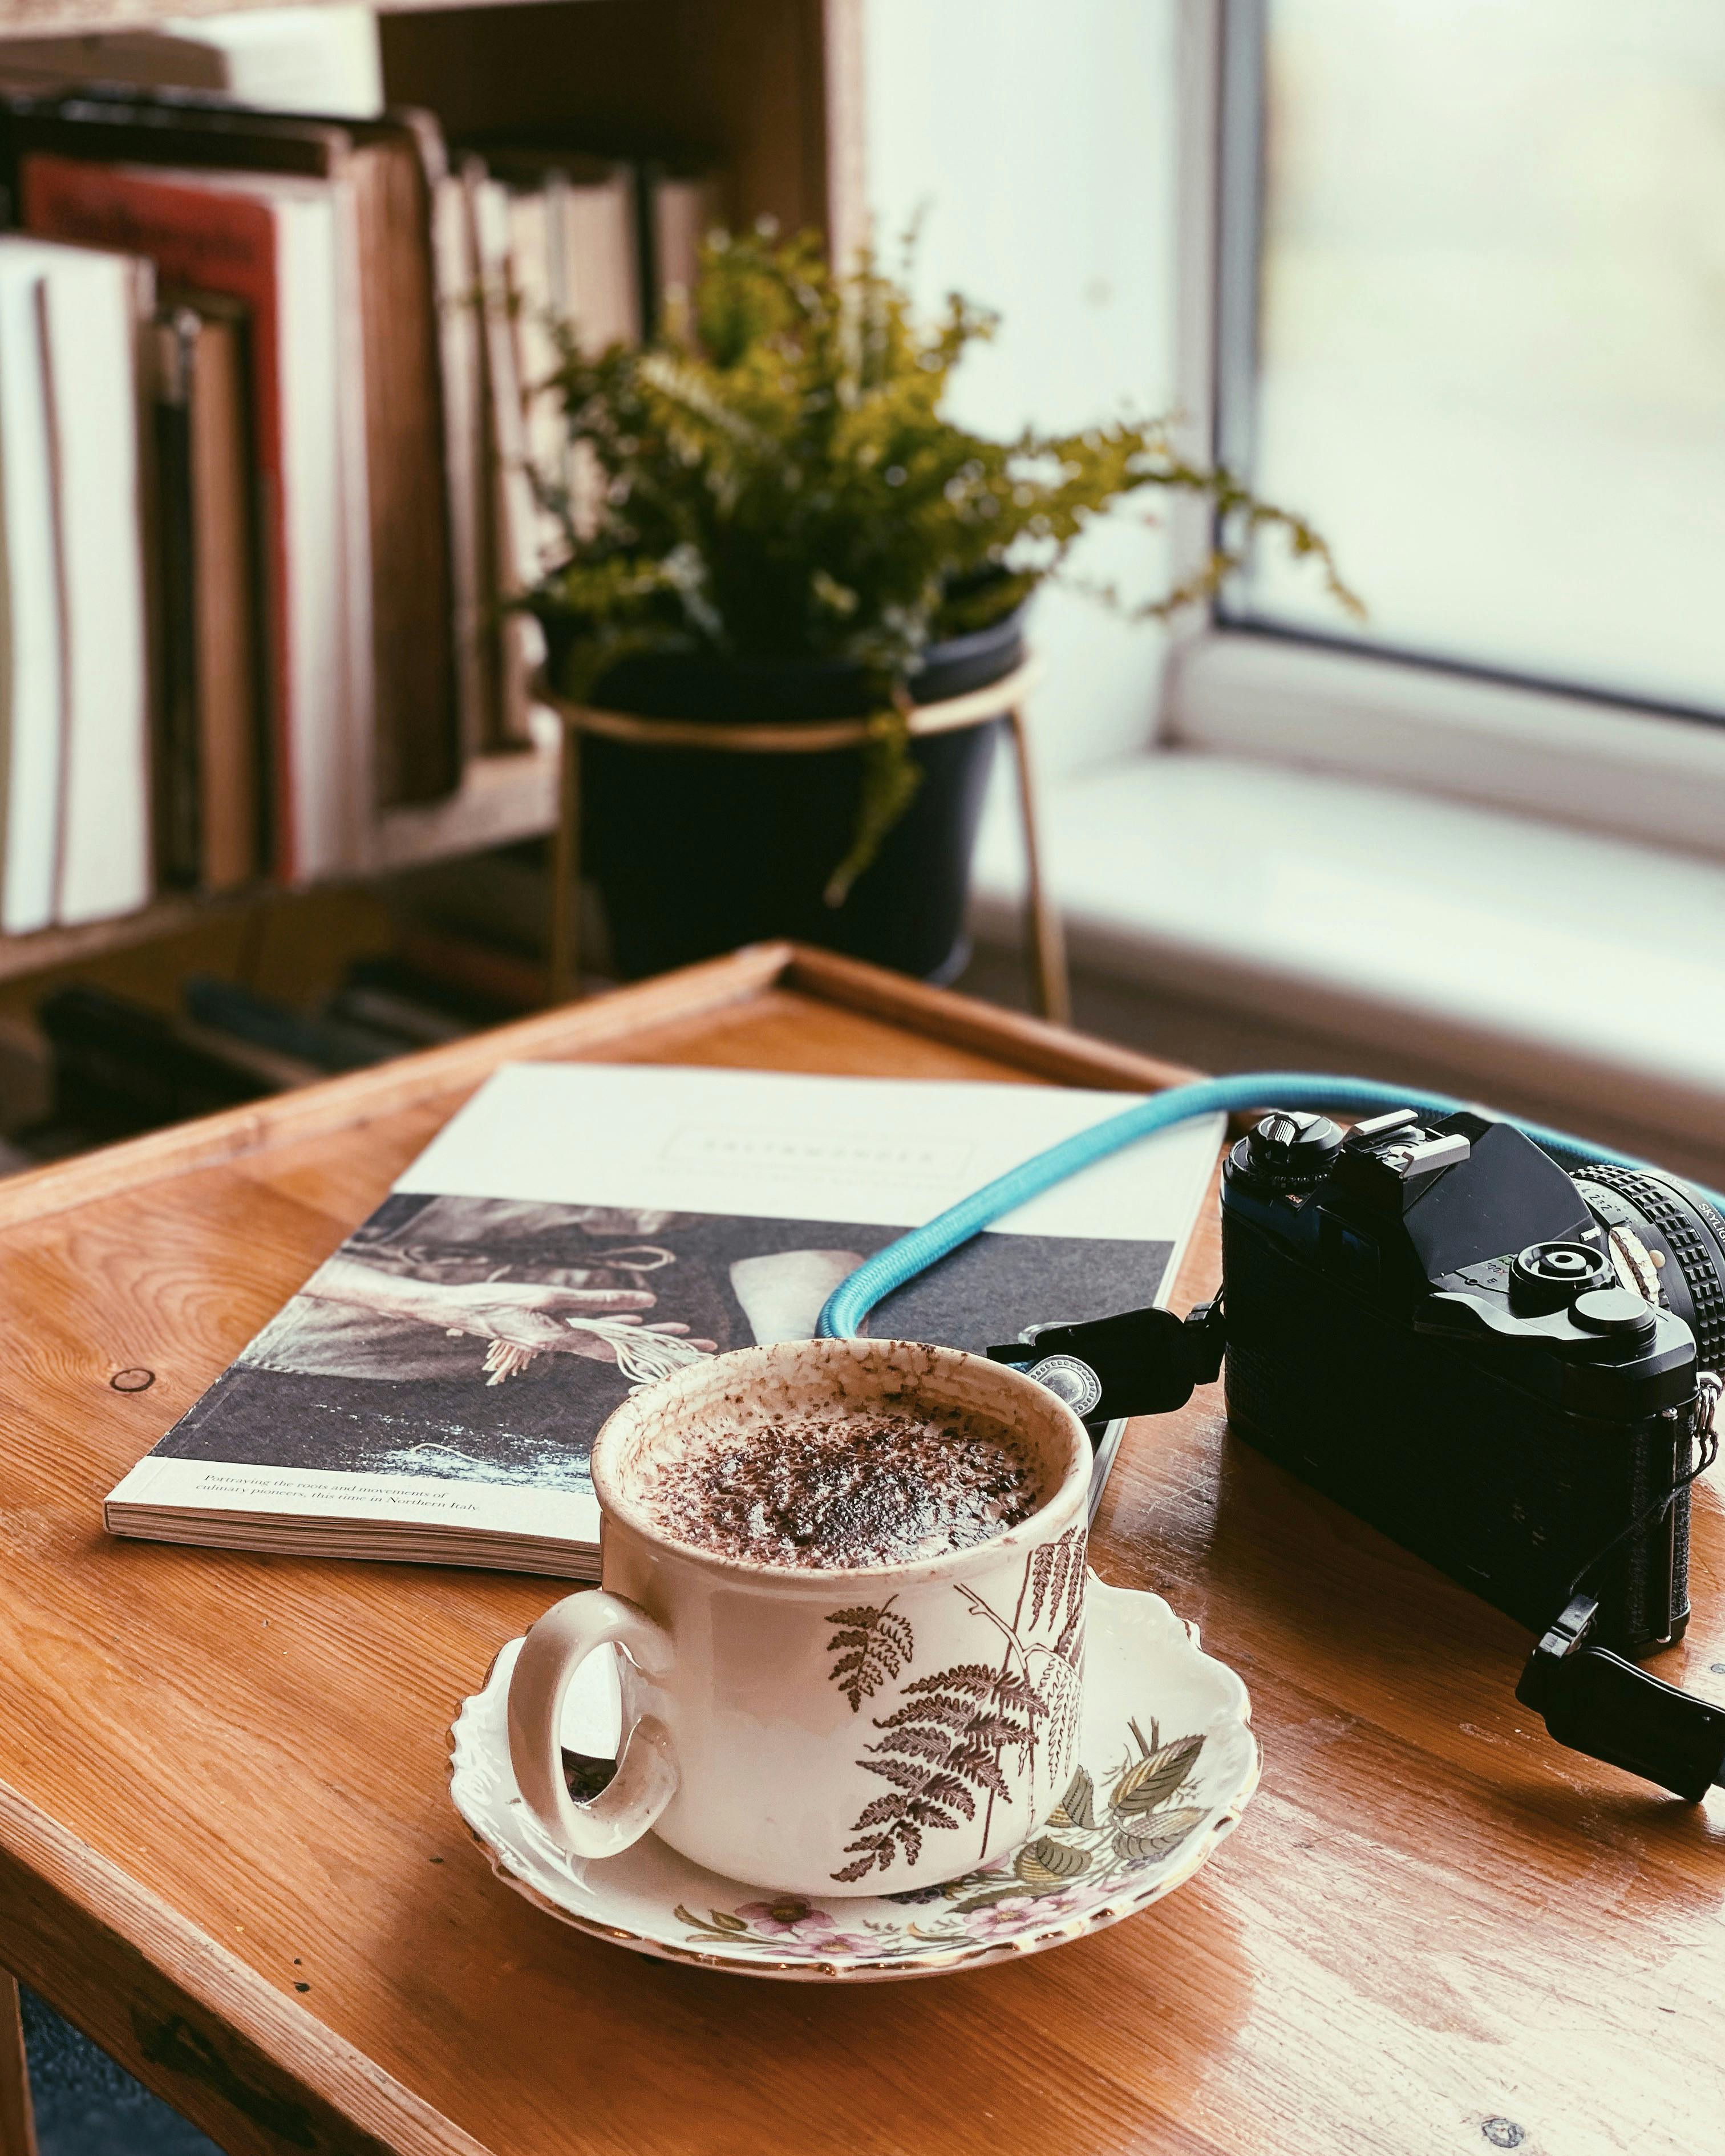 https://images.pexels.com/photos/18488473/pexels-photo-18488473/free-photo-of-coffee-cup-book-and-camera-near-window.jpeg